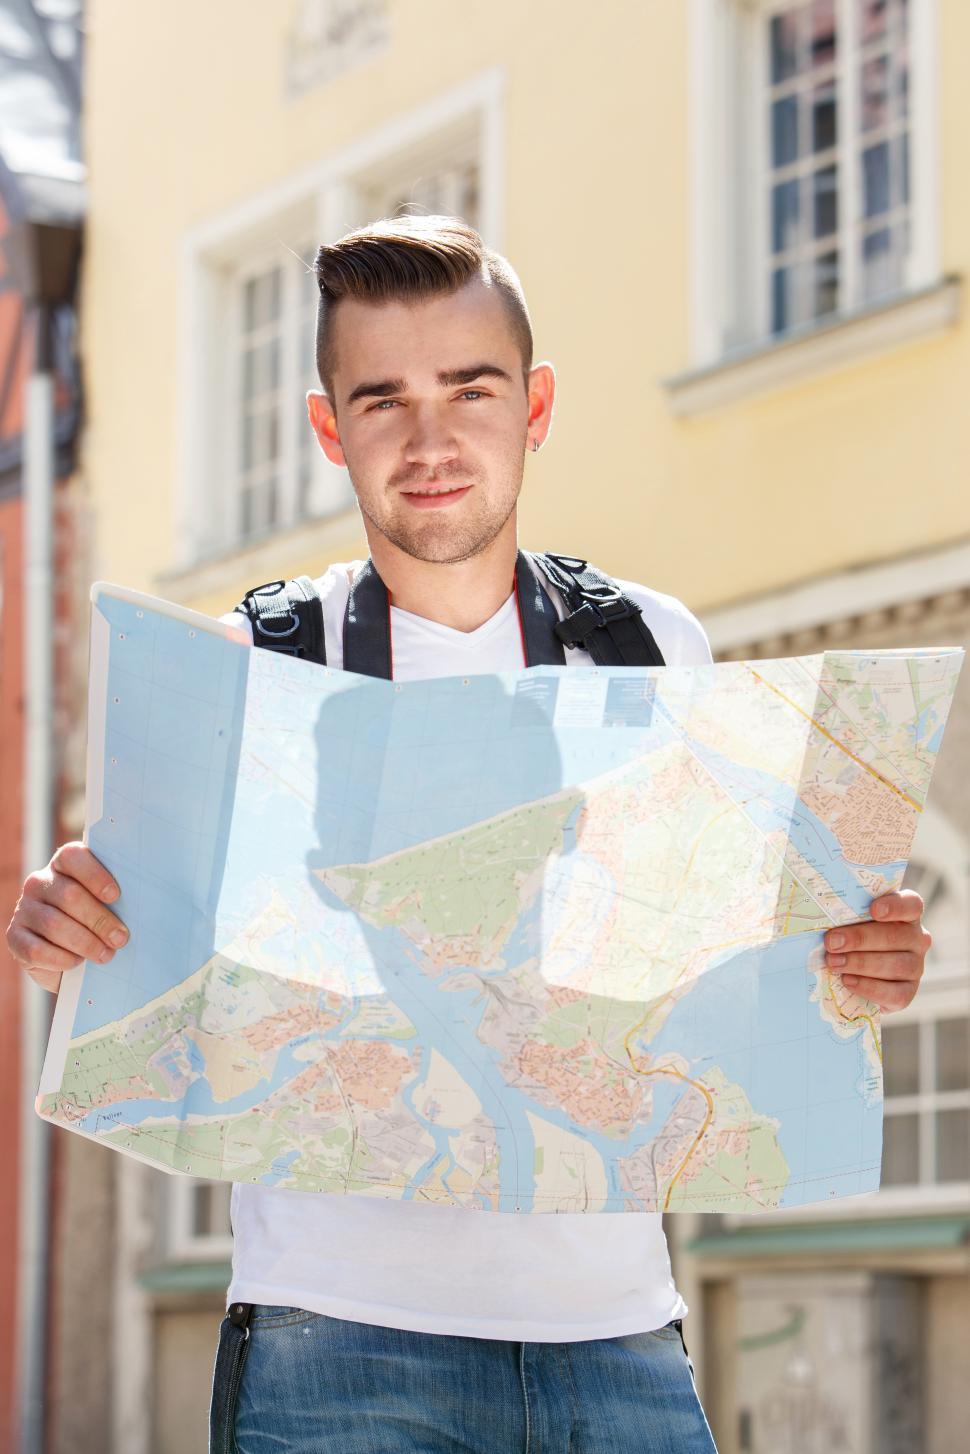 Free Image of Man in the city, finding his way with a map 